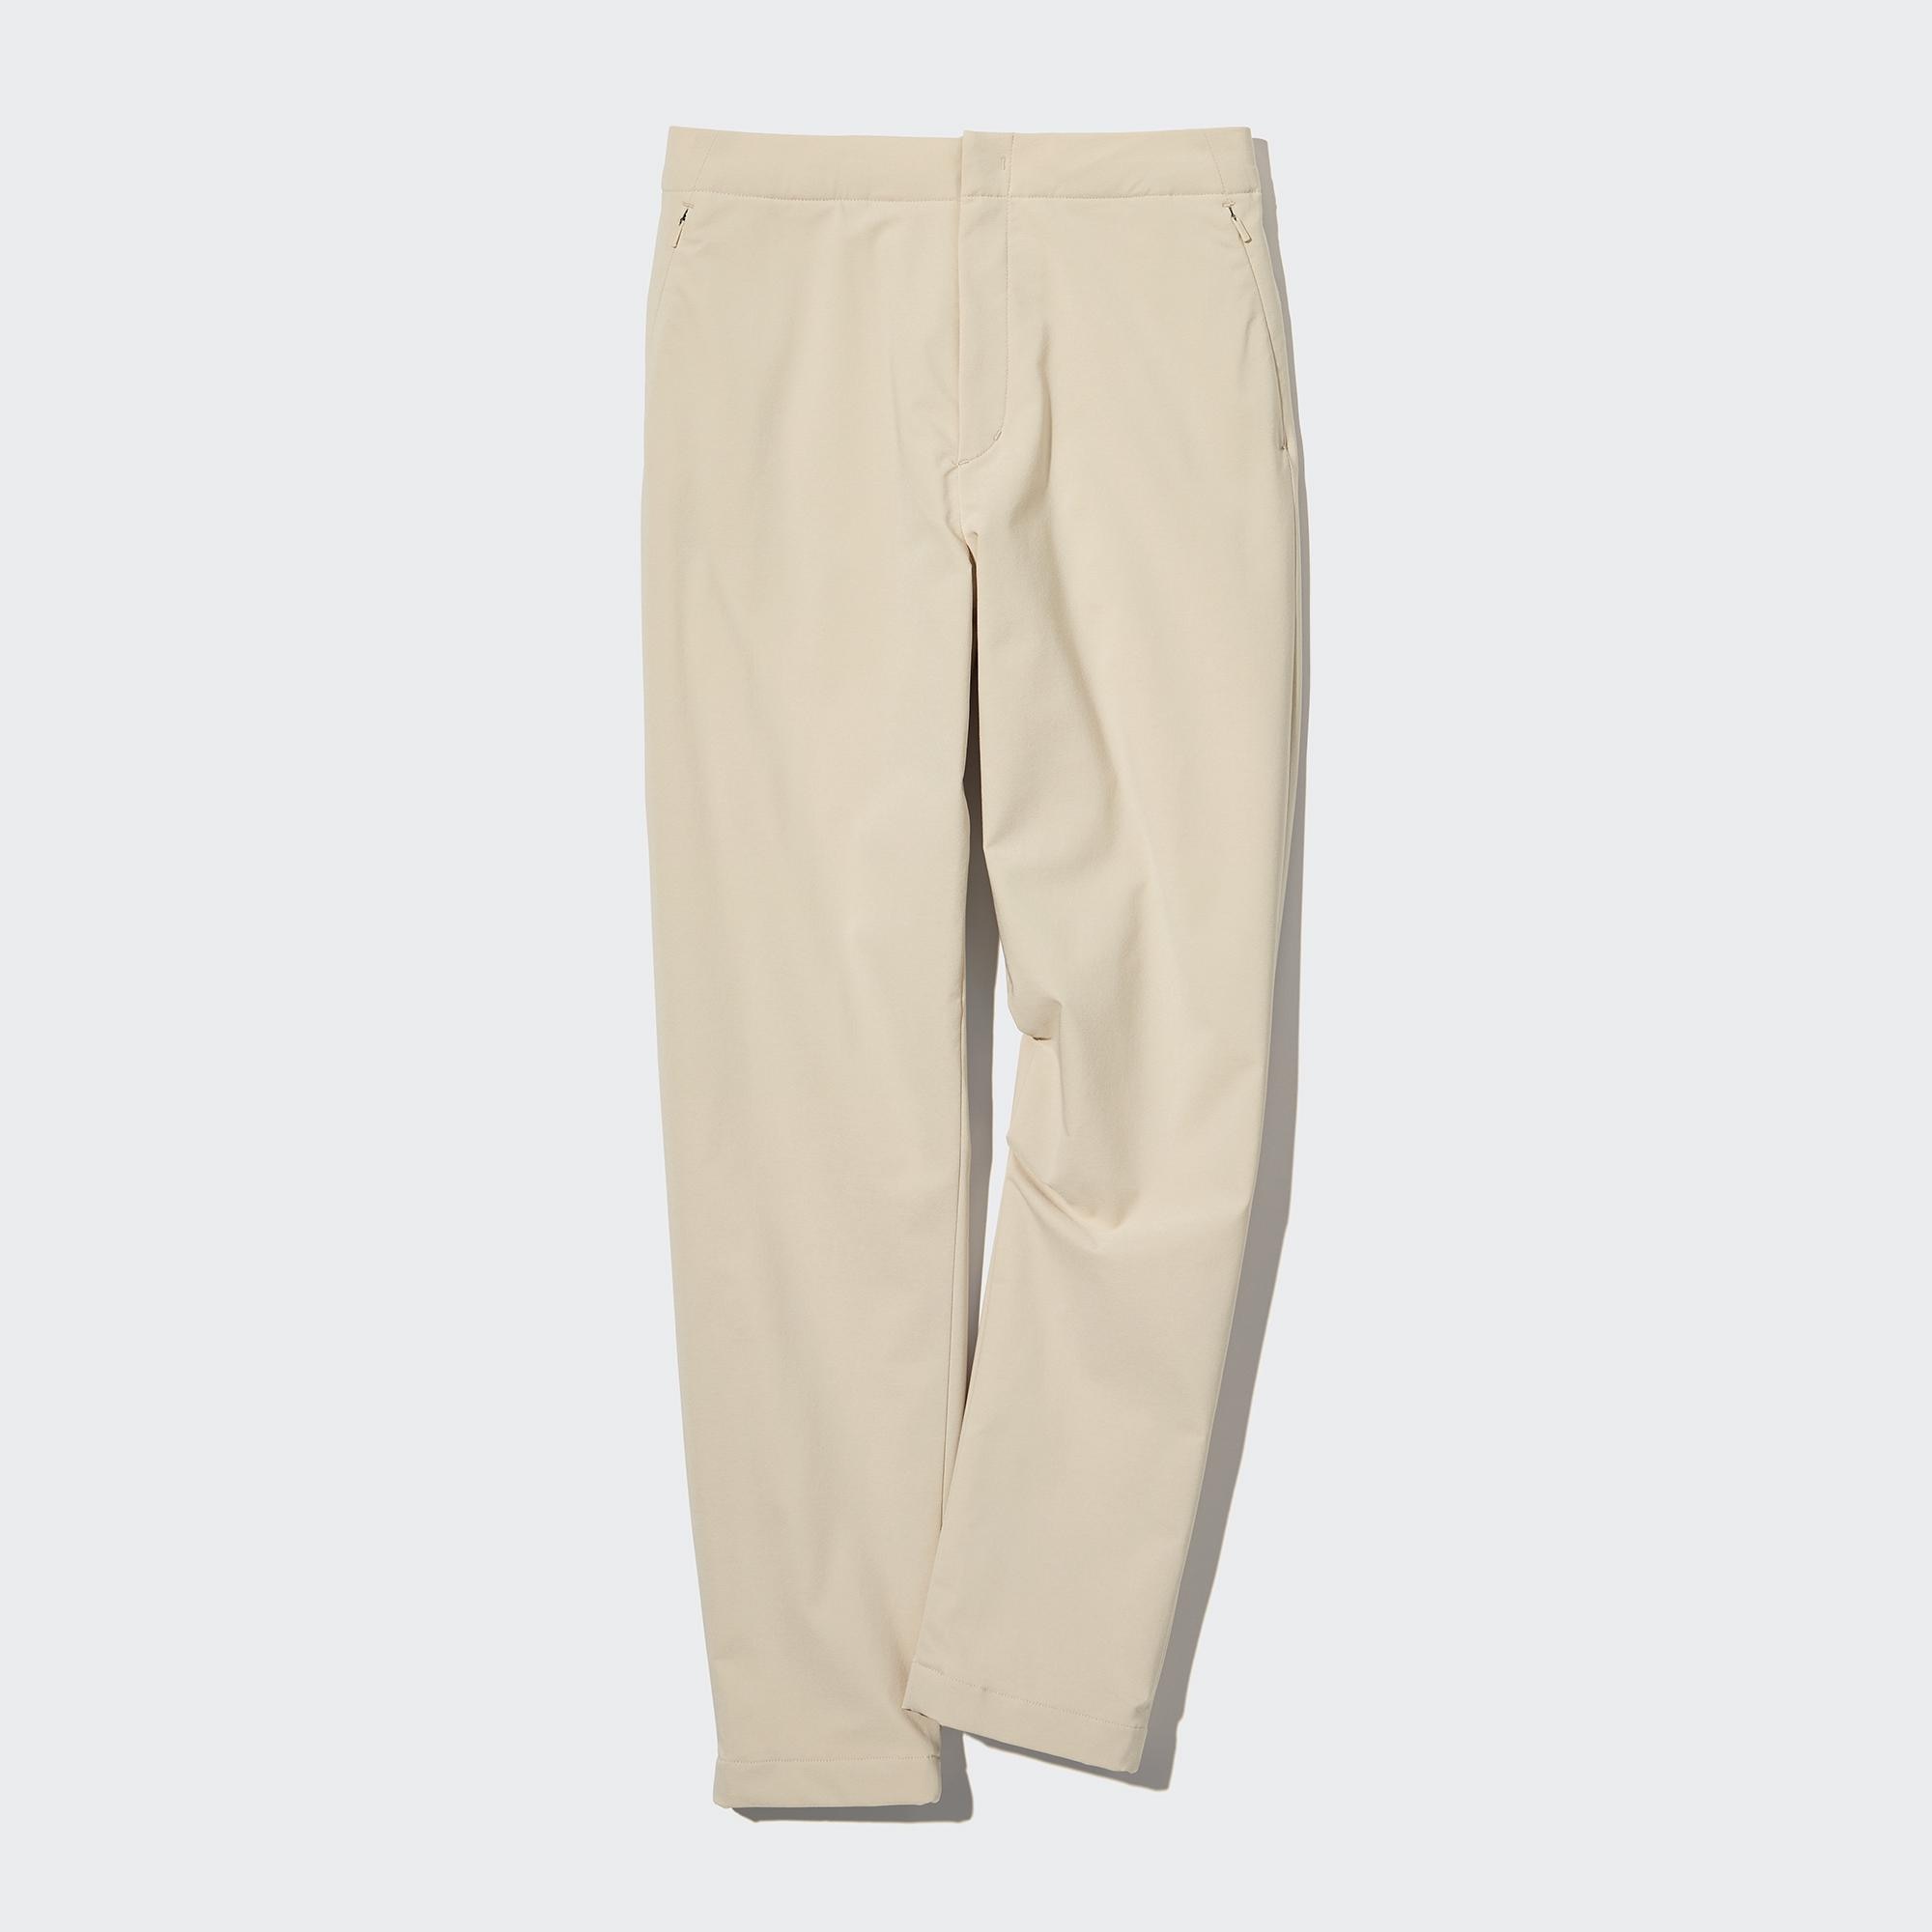 SALE】UNIQLO HEATTECH WARM Easy Jogger Pants JW ANDERSON good for outdoor  JAPAN £55.82 - PicClick UK